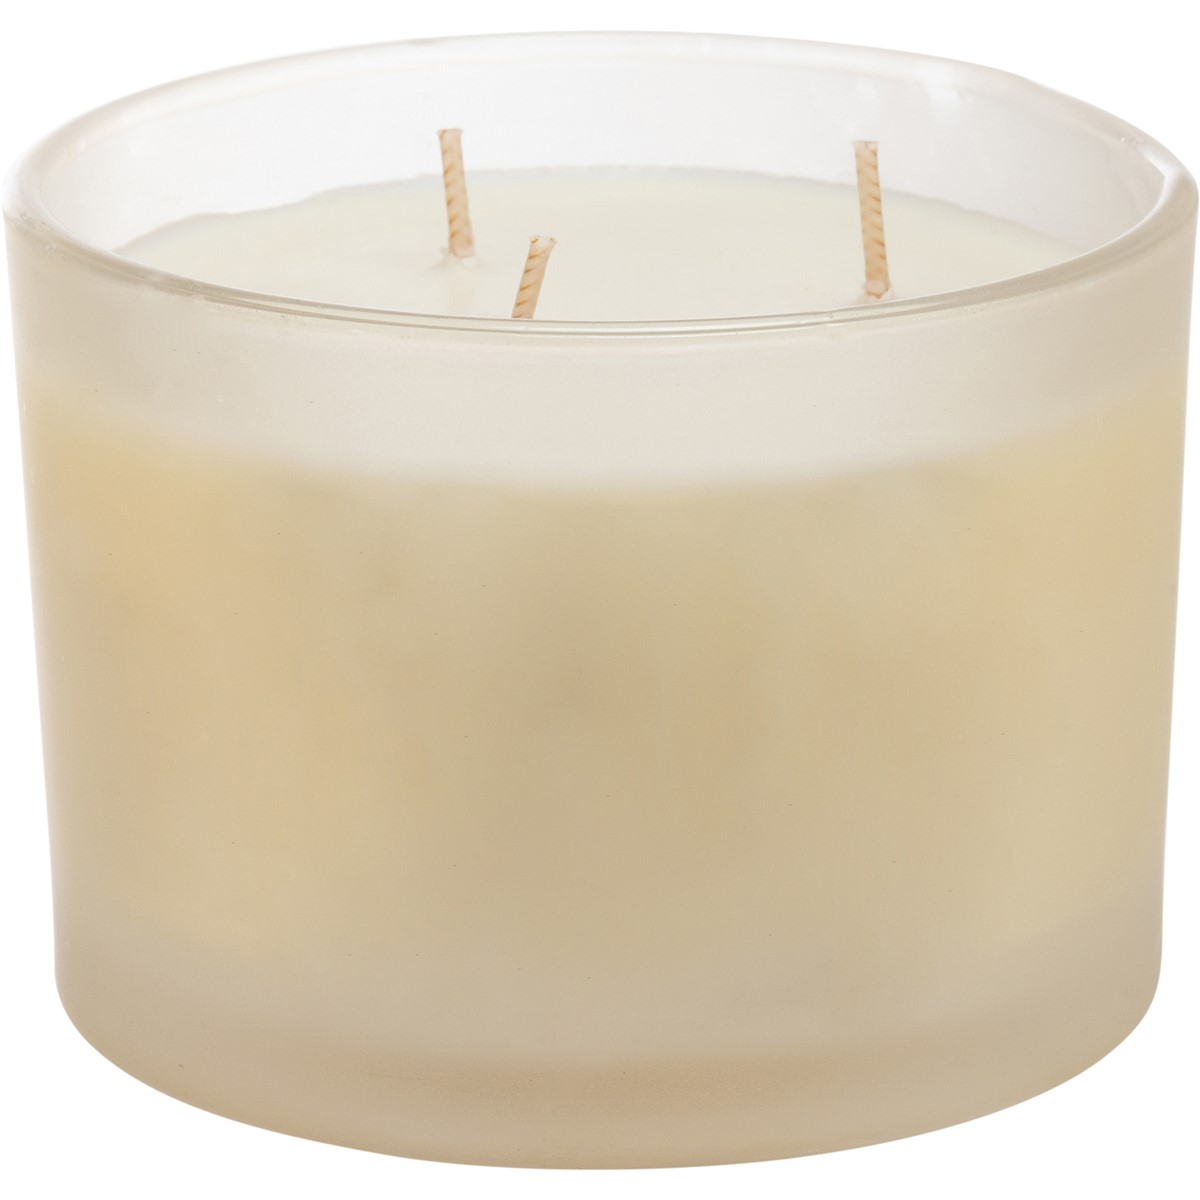 Our Effortless Friendship Jar Candle - Soy Wax, Glass, Cotton